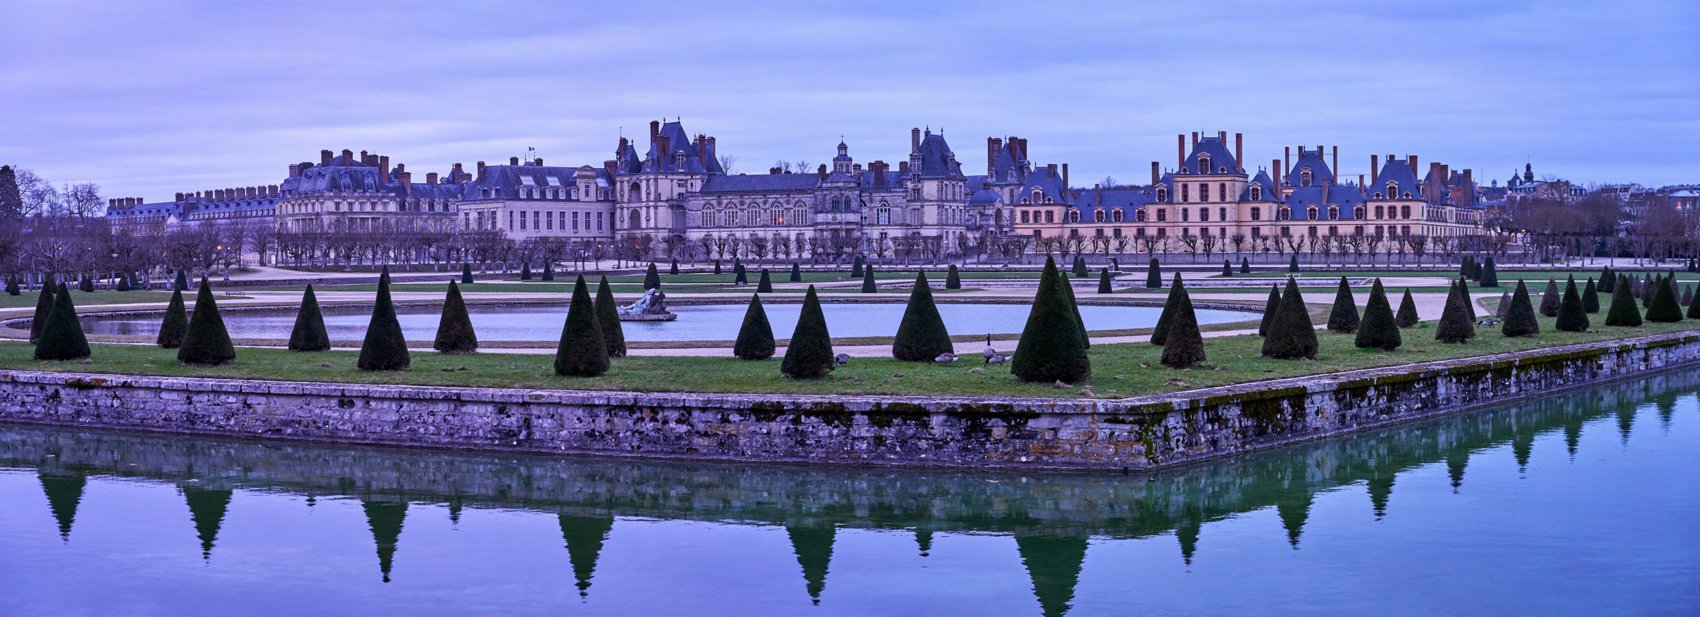 Hero Image forFontainebleau (Chateau, Park, Sunset, & Canal) Feb 2020